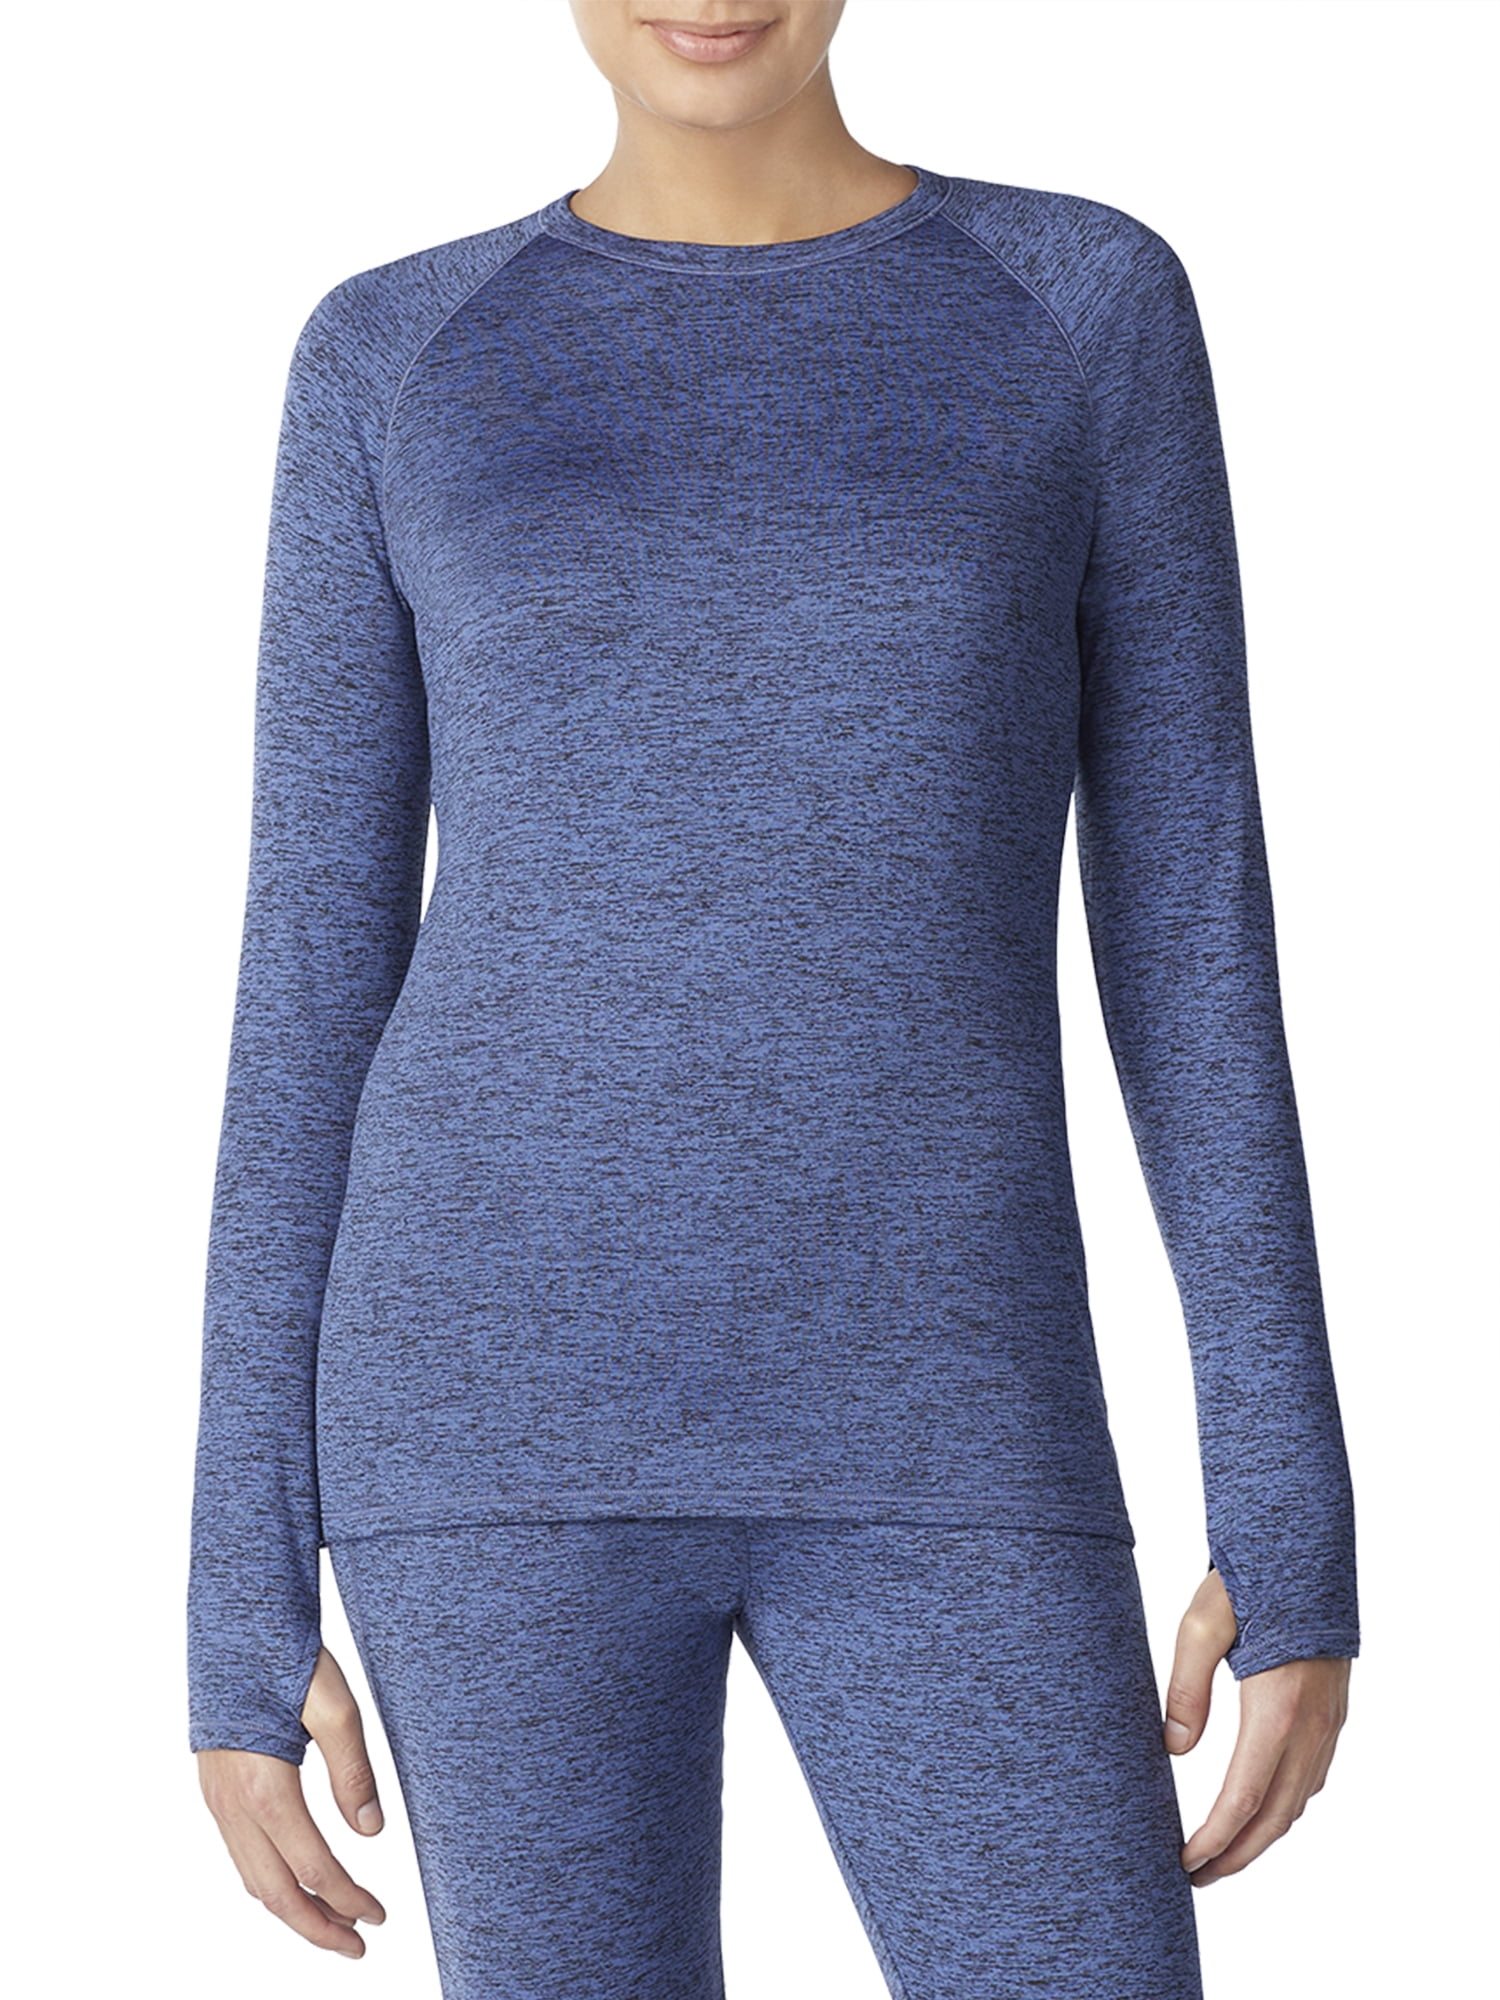 ClimateRight by Cuddl Duds Women's and Women's Plus Plush Warmth Long  Underwear Top 